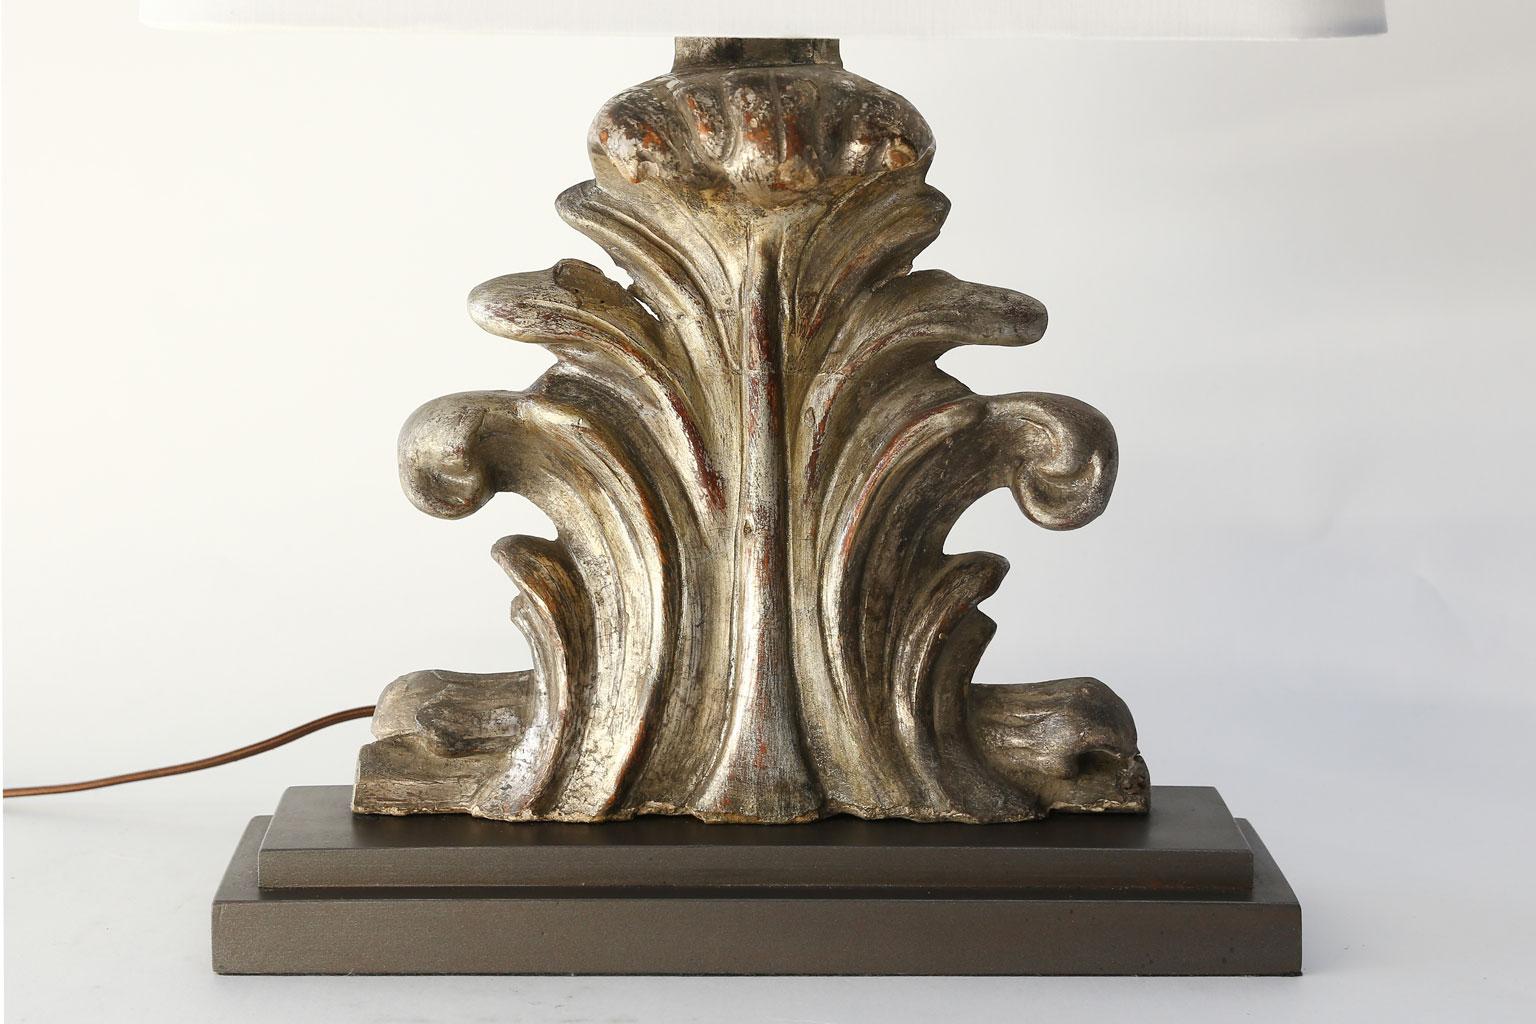 Custom silvered table lamp constructed from antique architectural fragment mounted on hand carved and painted stand. Newly wired for use within the USA using all UL approved parts. Includes complementary linen shade (listed measurements include